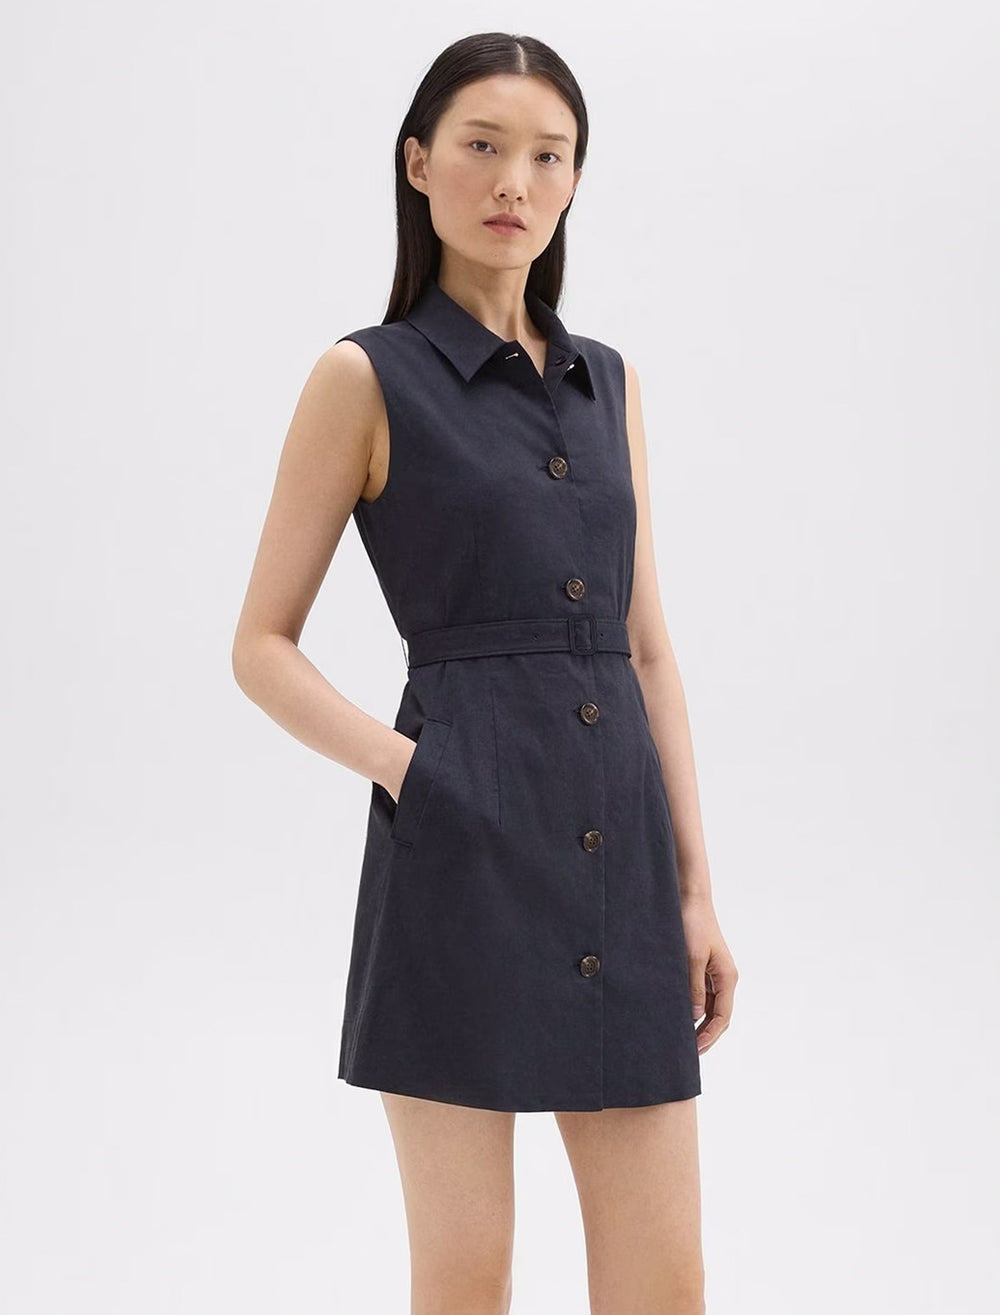 Model wearing Theory's belted sleeveless shirtdress in concord.